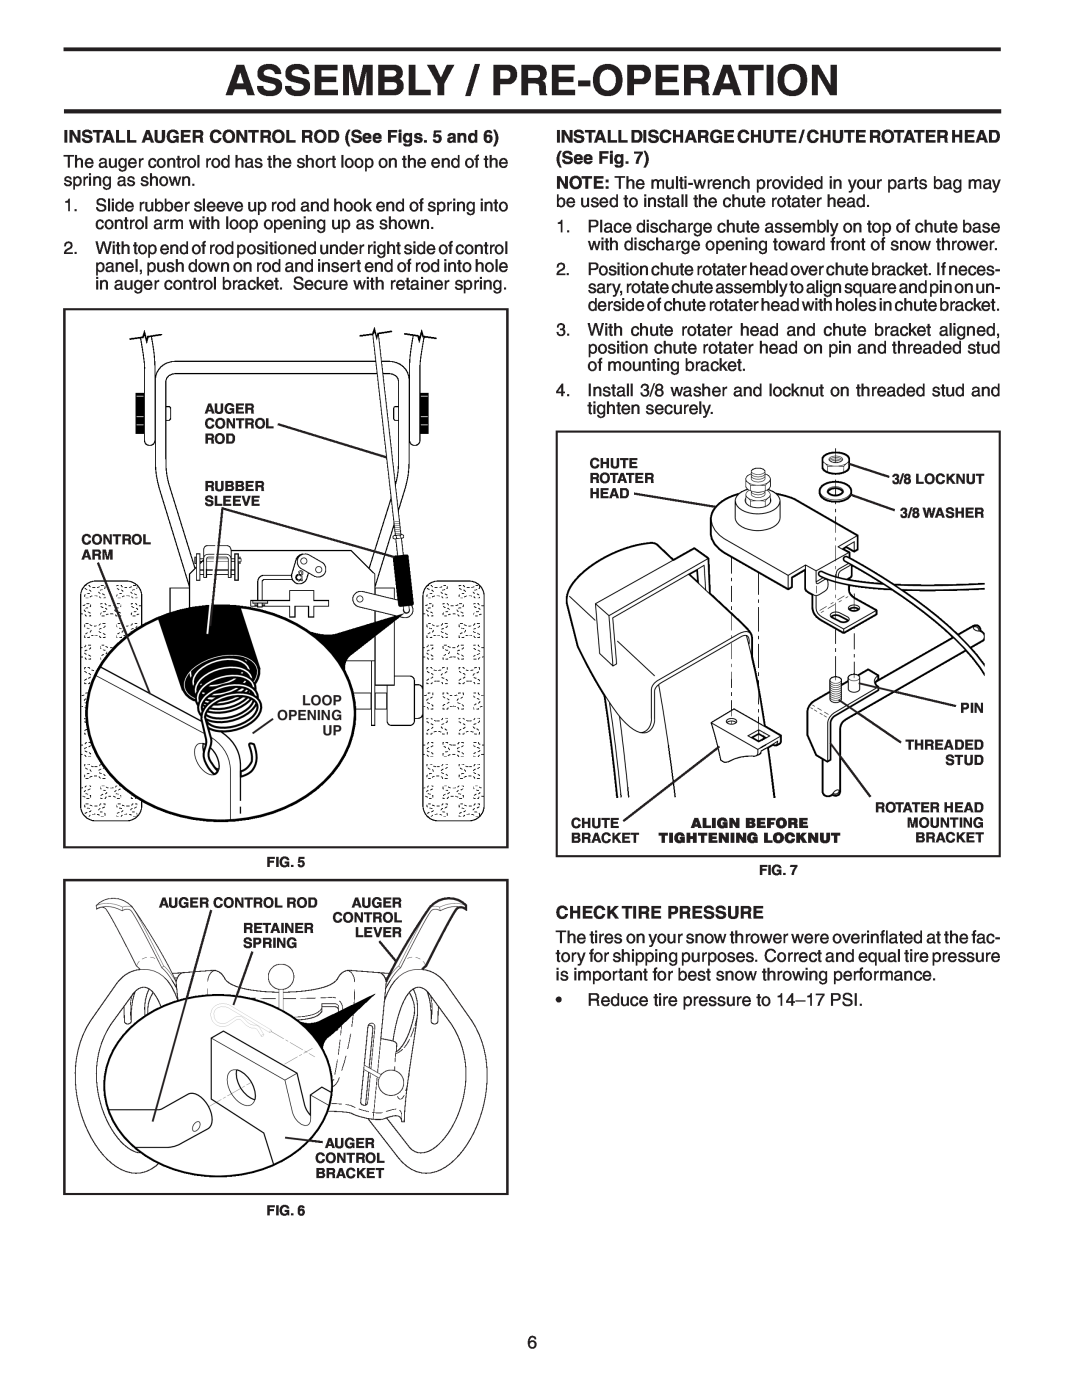 Poulan 96192000900, 403919 Assembly / Pre-Operation, INSTALL AUGER CONTROL ROD See Figs. 5 and, Check Tire Pressure 